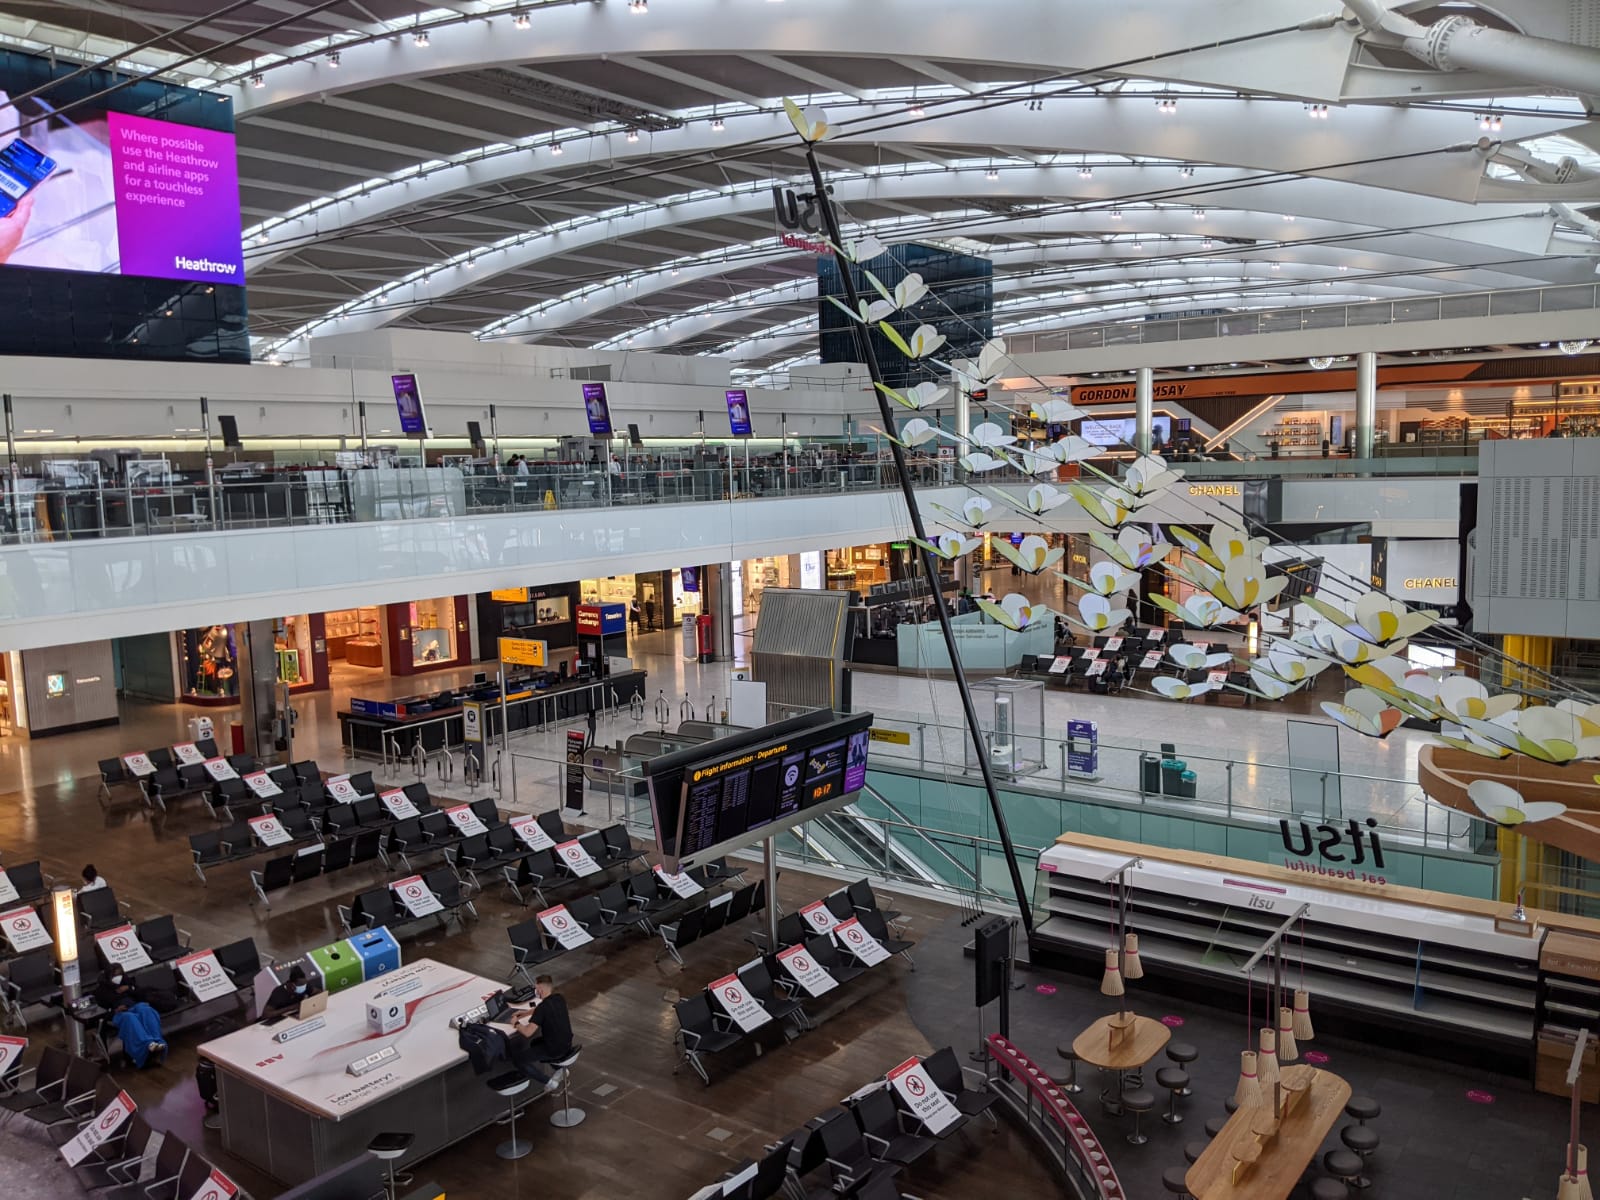 The departures area of T5, where seats are blocked off to allow for social distancing